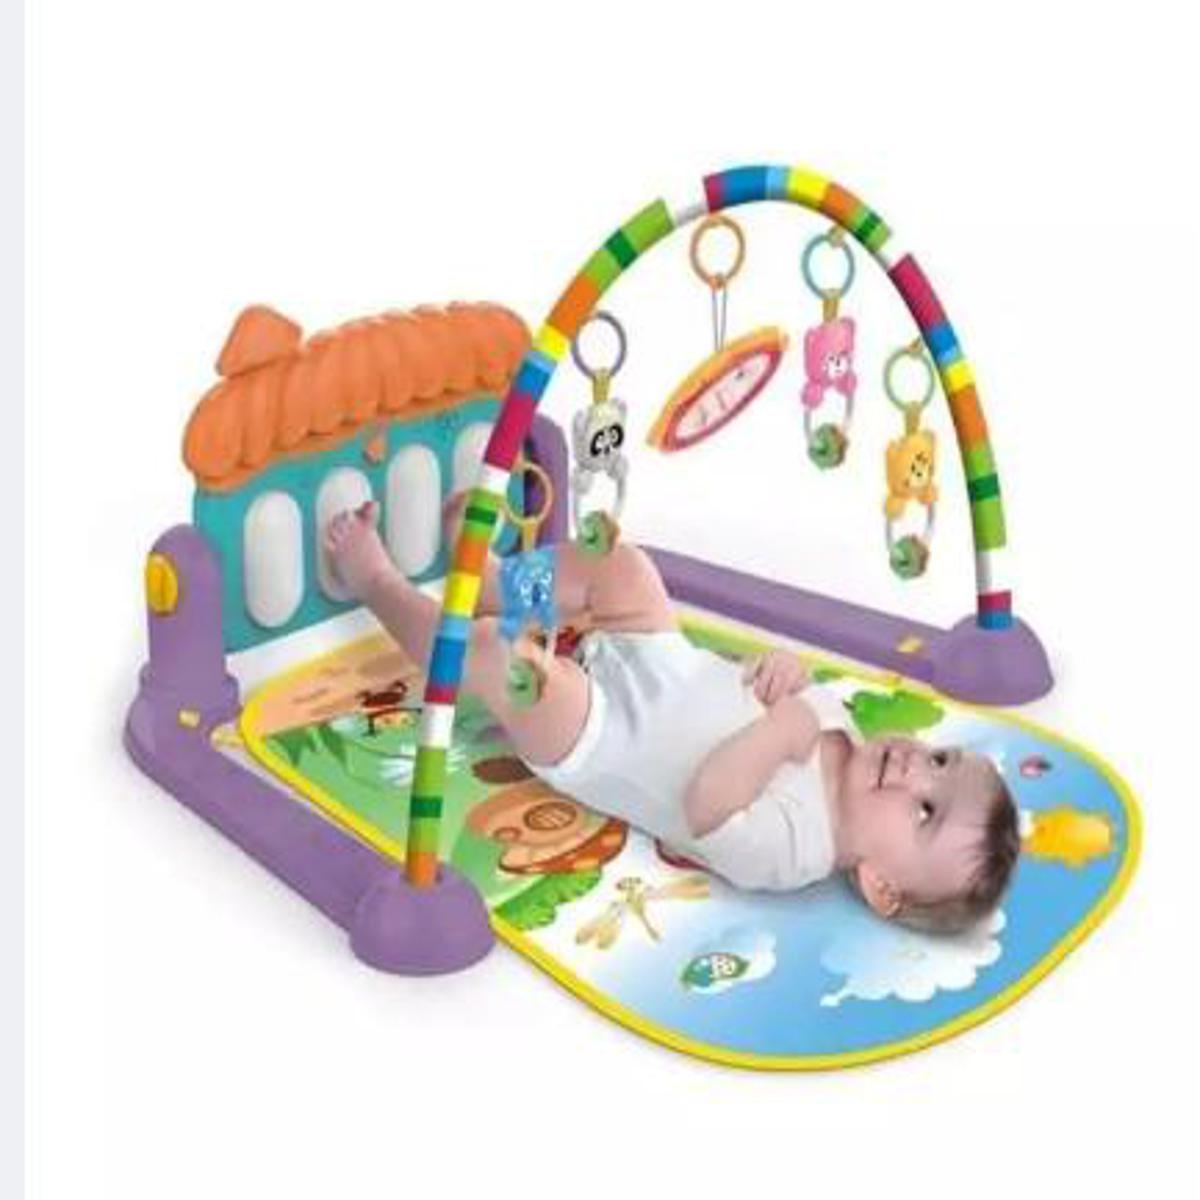 Baby music and play gym